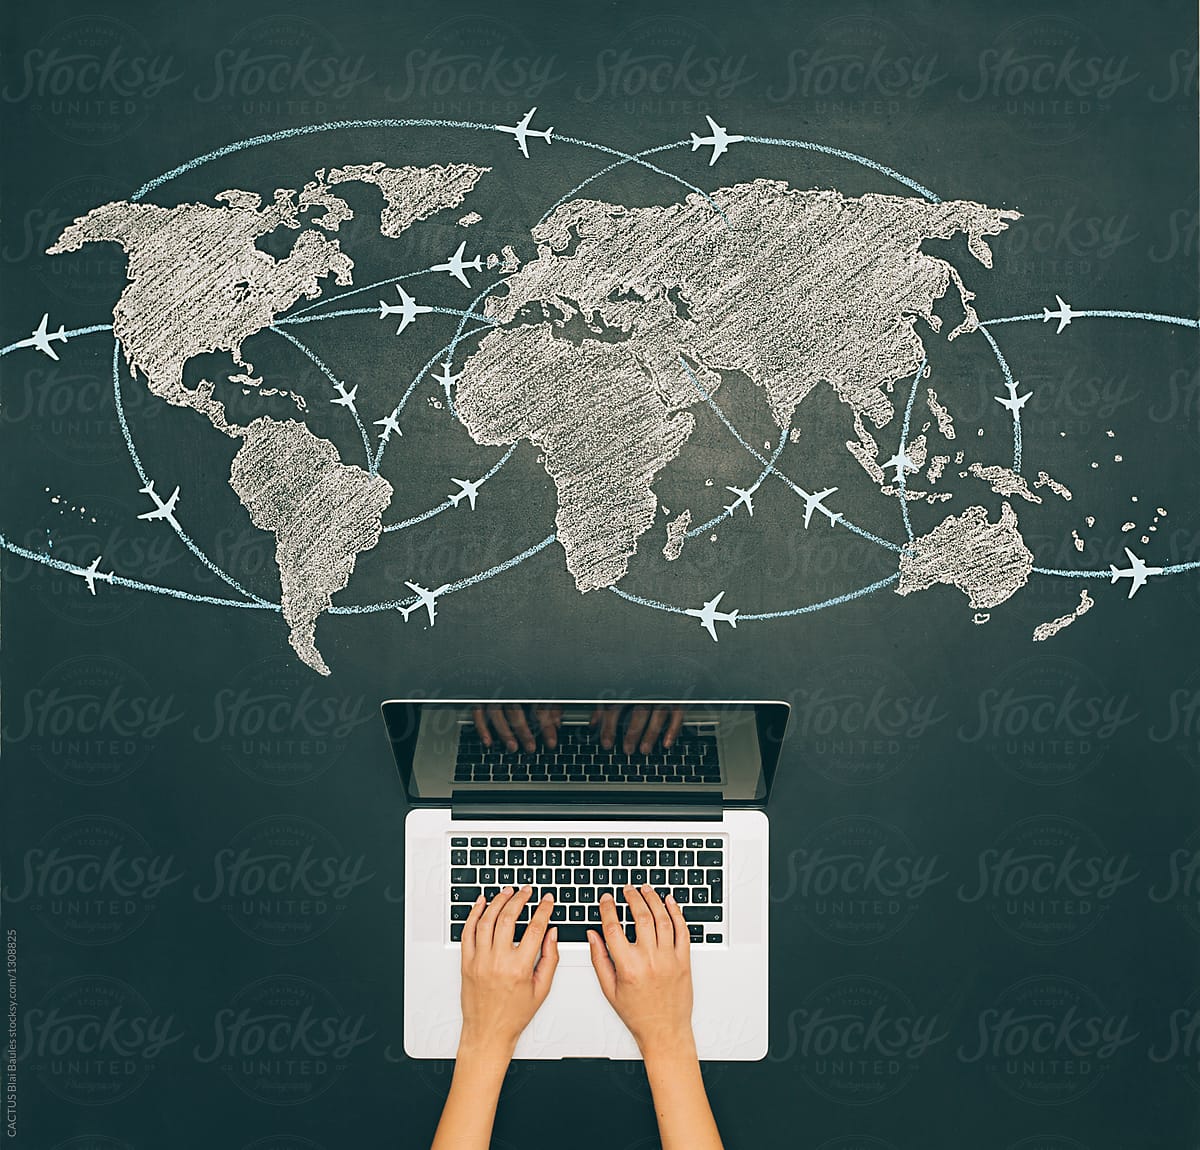 Laptop and world travel map